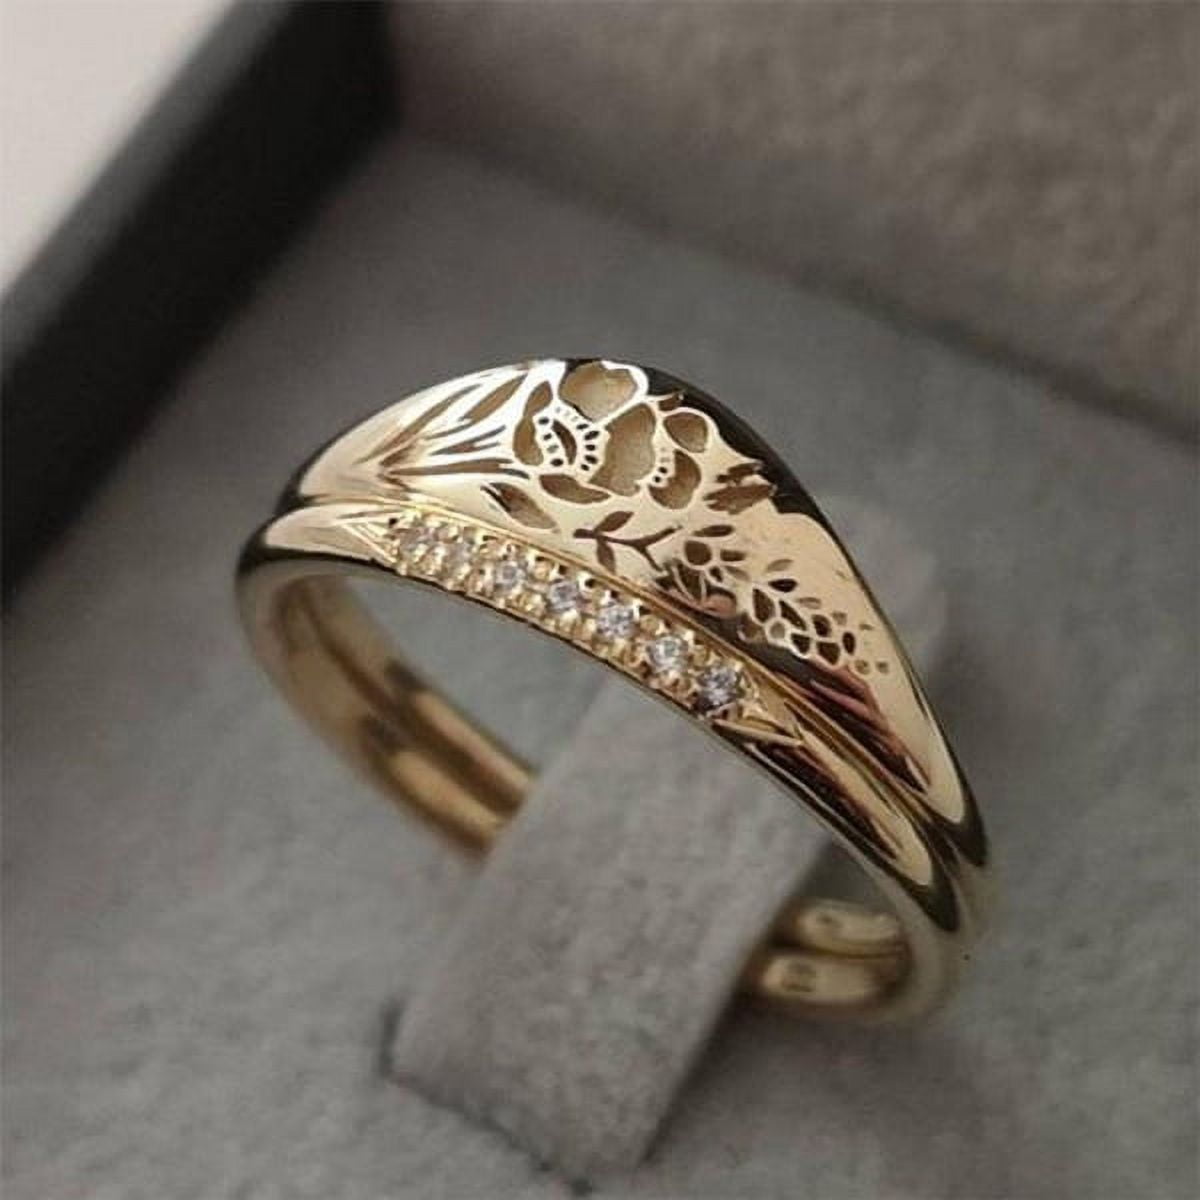 Luxury Designer Heart Silver Signet Ring For Women Original, High Quality  Love Silver Signet Ring With Diamond Accents Perfect Anniversary Gift T316P  From Ai838, $17.62 | DHgate.Com